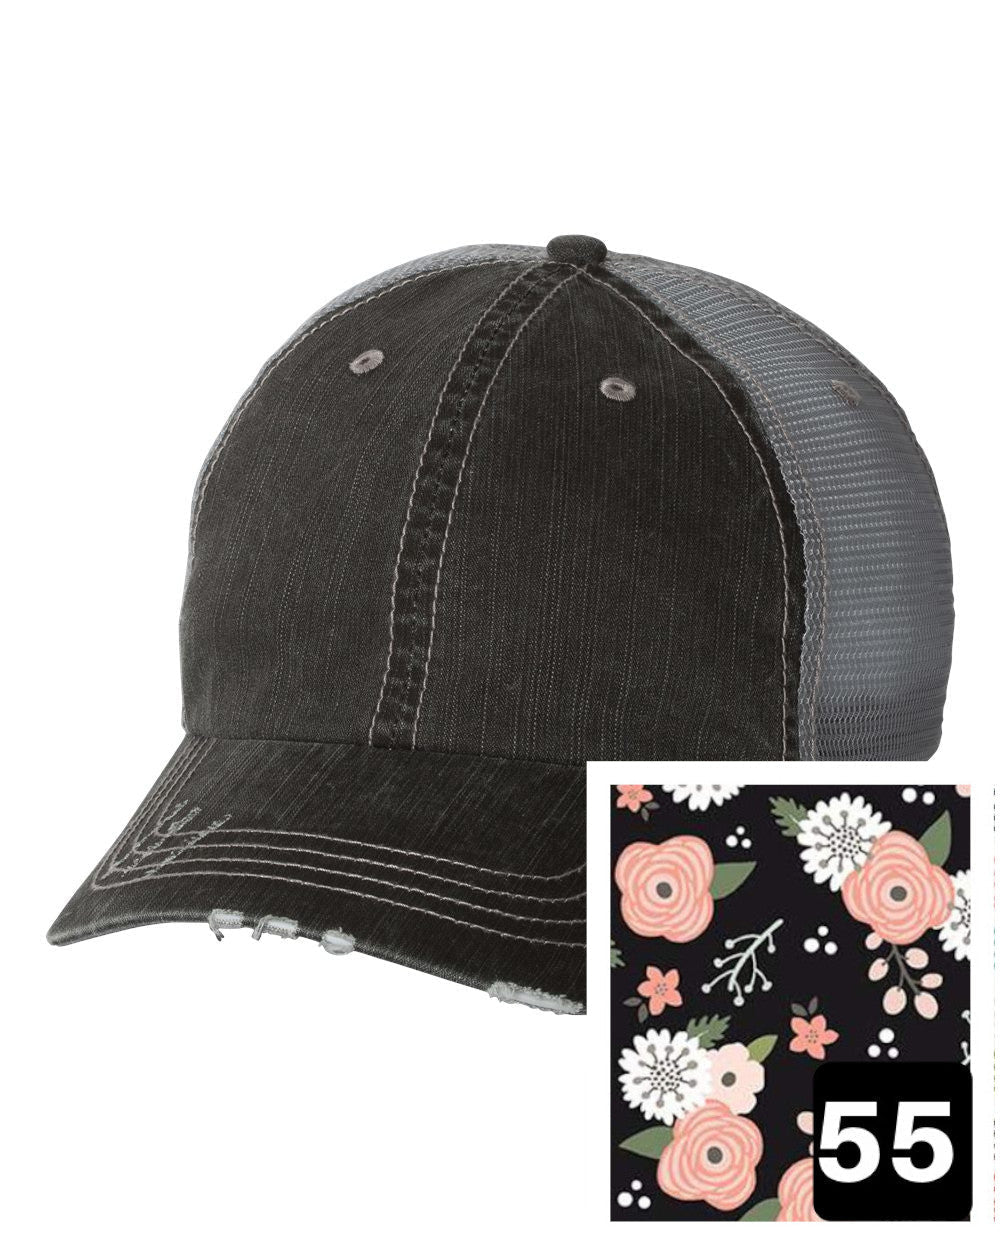 gray distressed trucker hat with petite floral on navy fabric state of Connecticut